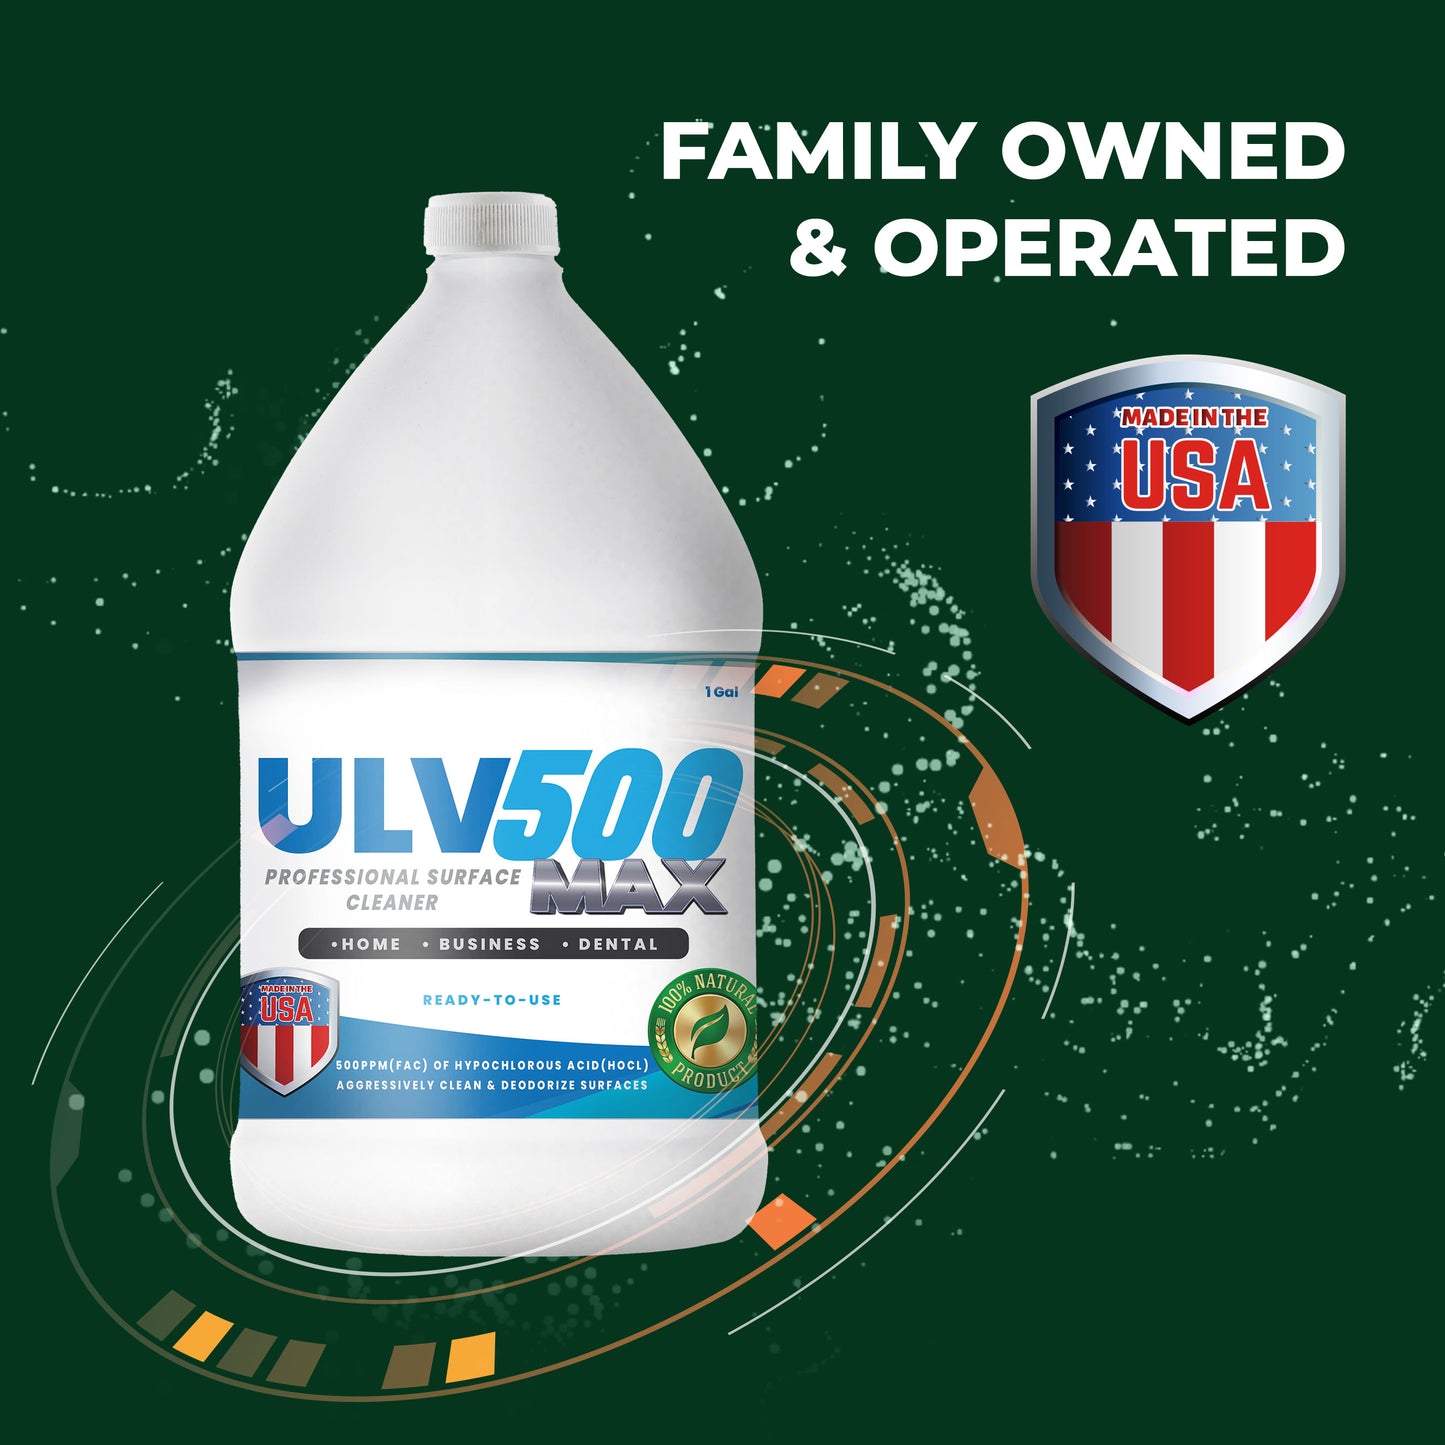 ULV500 Max Professional Surface Cleaner (1Gal)